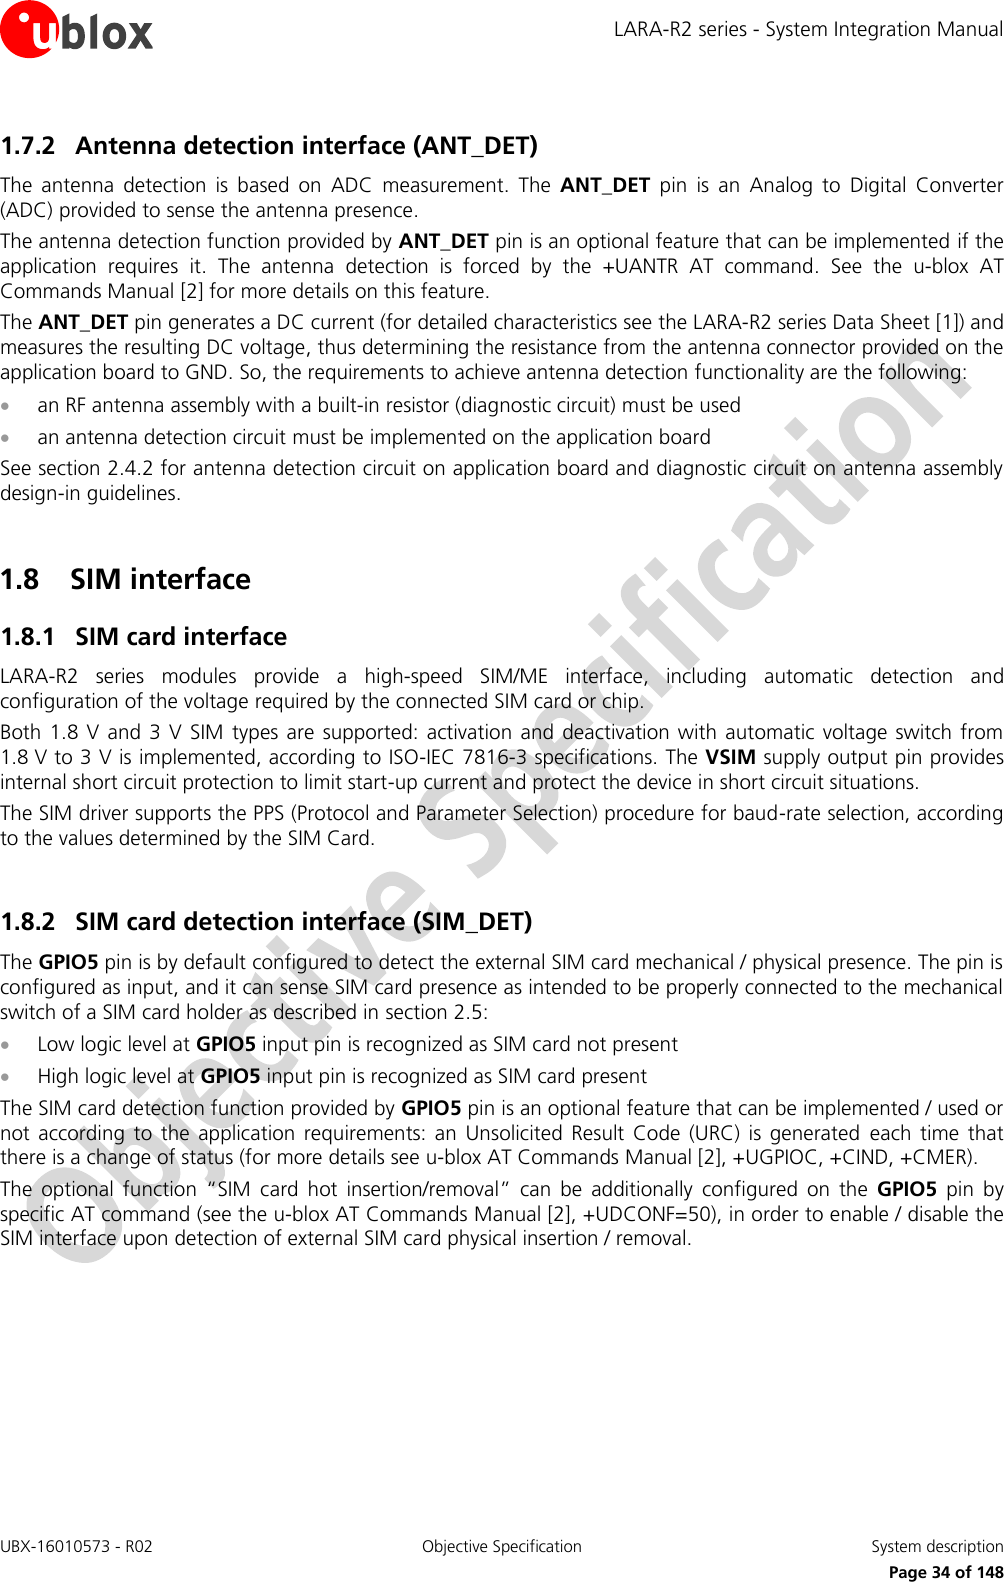 LARA-R2 series - System Integration Manual UBX-16010573 - R02  Objective Specification  System description     Page 34 of 148 1.7.2 Antenna detection interface (ANT_DET) The  antenna  detection  is  based  on  ADC  measurement.  The  ANT_DET  pin  is  an  Analog  to  Digital  Converter (ADC) provided to sense the antenna presence. The antenna detection function provided by ANT_DET pin is an optional feature that can be implemented if the application  requires  it.  The  antenna  detection  is  forced  by  the  +UANTR  AT  command.  See  the  u-blox  AT Commands Manual [2] for more details on this feature. The ANT_DET pin generates a DC current (for detailed characteristics see the LARA-R2 series Data Sheet [1]) and measures the resulting DC voltage, thus determining the resistance from the antenna connector provided on the application board to GND. So, the requirements to achieve antenna detection functionality are the following:  an RF antenna assembly with a built-in resistor (diagnostic circuit) must be used  an antenna detection circuit must be implemented on the application board See section 2.4.2 for antenna detection circuit on application board and diagnostic circuit on antenna assembly design-in guidelines.  1.8 SIM interface 1.8.1 SIM card interface LARA-R2  series  modules  provide  a  high-speed  SIM/ME  interface,  including  automatic  detection  and configuration of the voltage required by the connected SIM card or chip. Both 1.8  V  and  3  V  SIM  types  are  supported:  activation  and deactivation with  automatic  voltage  switch from 1.8 V to 3 V is implemented, according to ISO-IEC 7816-3 specifications. The VSIM supply output pin provides internal short circuit protection to limit start-up current and protect the device in short circuit situations. The SIM driver supports the PPS (Protocol and Parameter Selection) procedure for baud-rate selection, according to the values determined by the SIM Card.  1.8.2 SIM card detection interface (SIM_DET) The GPIO5 pin is by default configured to detect the external SIM card mechanical / physical presence. The pin is configured as input, and it can sense SIM card presence as intended to be properly connected to the mechanical switch of a SIM card holder as described in section 2.5:  Low logic level at GPIO5 input pin is recognized as SIM card not present  High logic level at GPIO5 input pin is recognized as SIM card present The SIM card detection function provided by GPIO5 pin is an optional feature that can be implemented / used or not  according  to  the  application  requirements:  an  Unsolicited  Result  Code  (URC)  is  generated  each  time  that there is a change of status (for more details see u-blox AT Commands Manual [2], +UGPIOC, +CIND, +CMER). The  optional  function  “SIM  card  hot  insertion/removal”  can  be  additionally  configured  on  the  GPIO5  pin  by specific AT command (see the u-blox AT Commands Manual [2], +UDCONF=50), in order to enable / disable the SIM interface upon detection of external SIM card physical insertion / removal.   